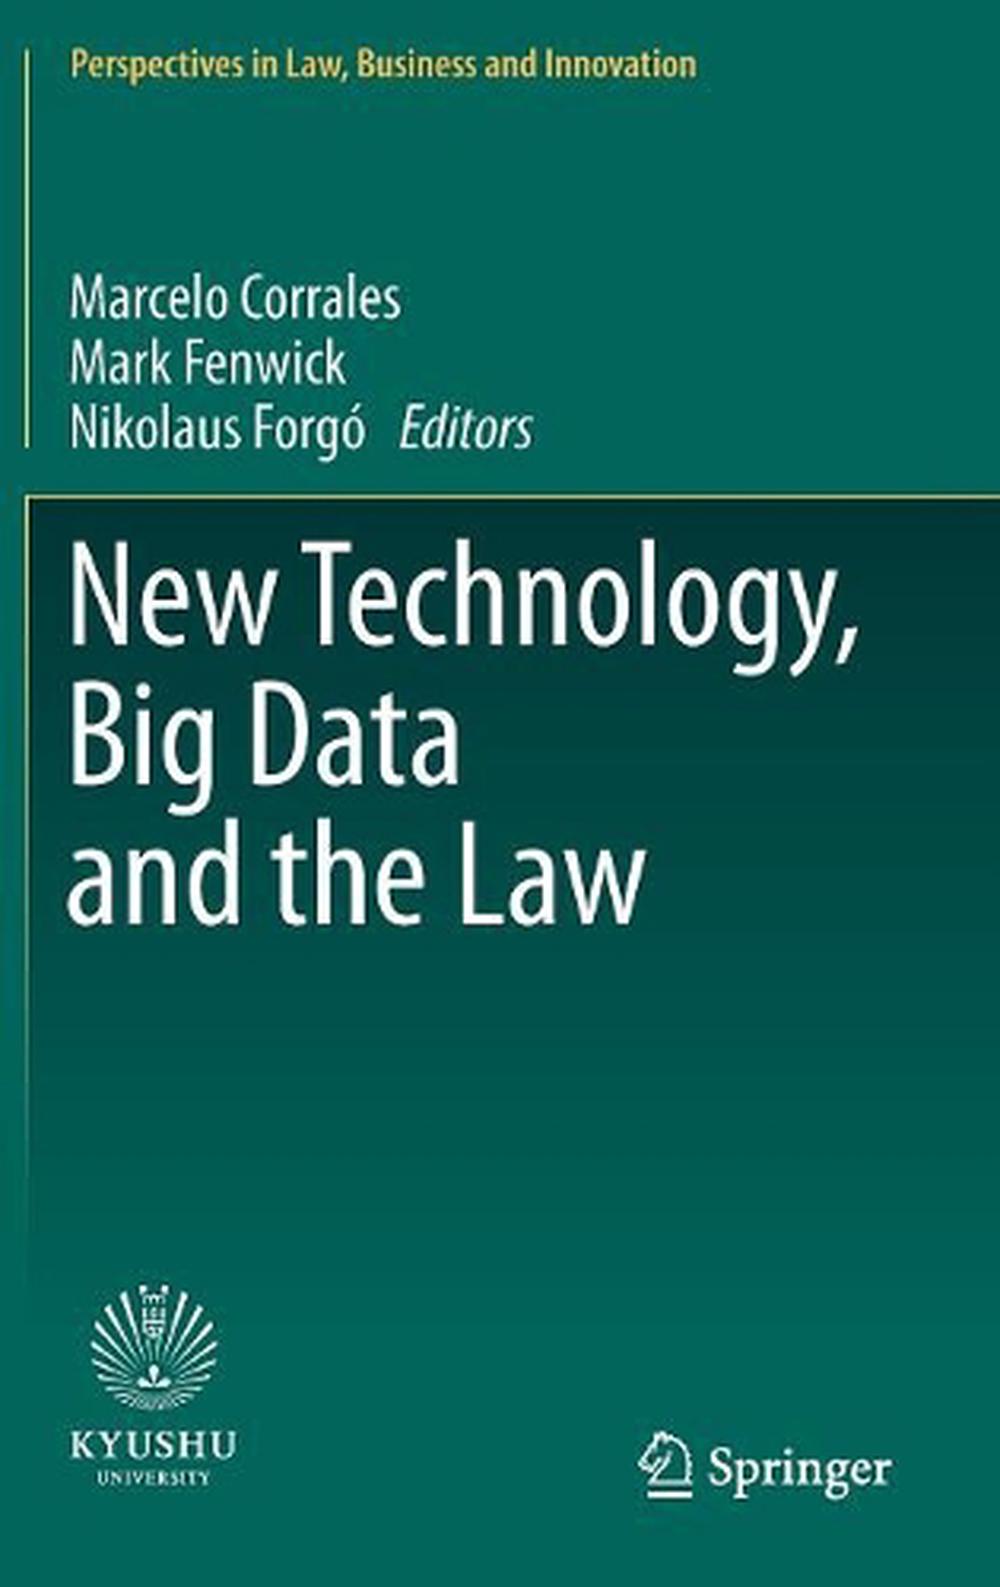 New Technology, Big Data and the Law (English) Hardcover Book Free